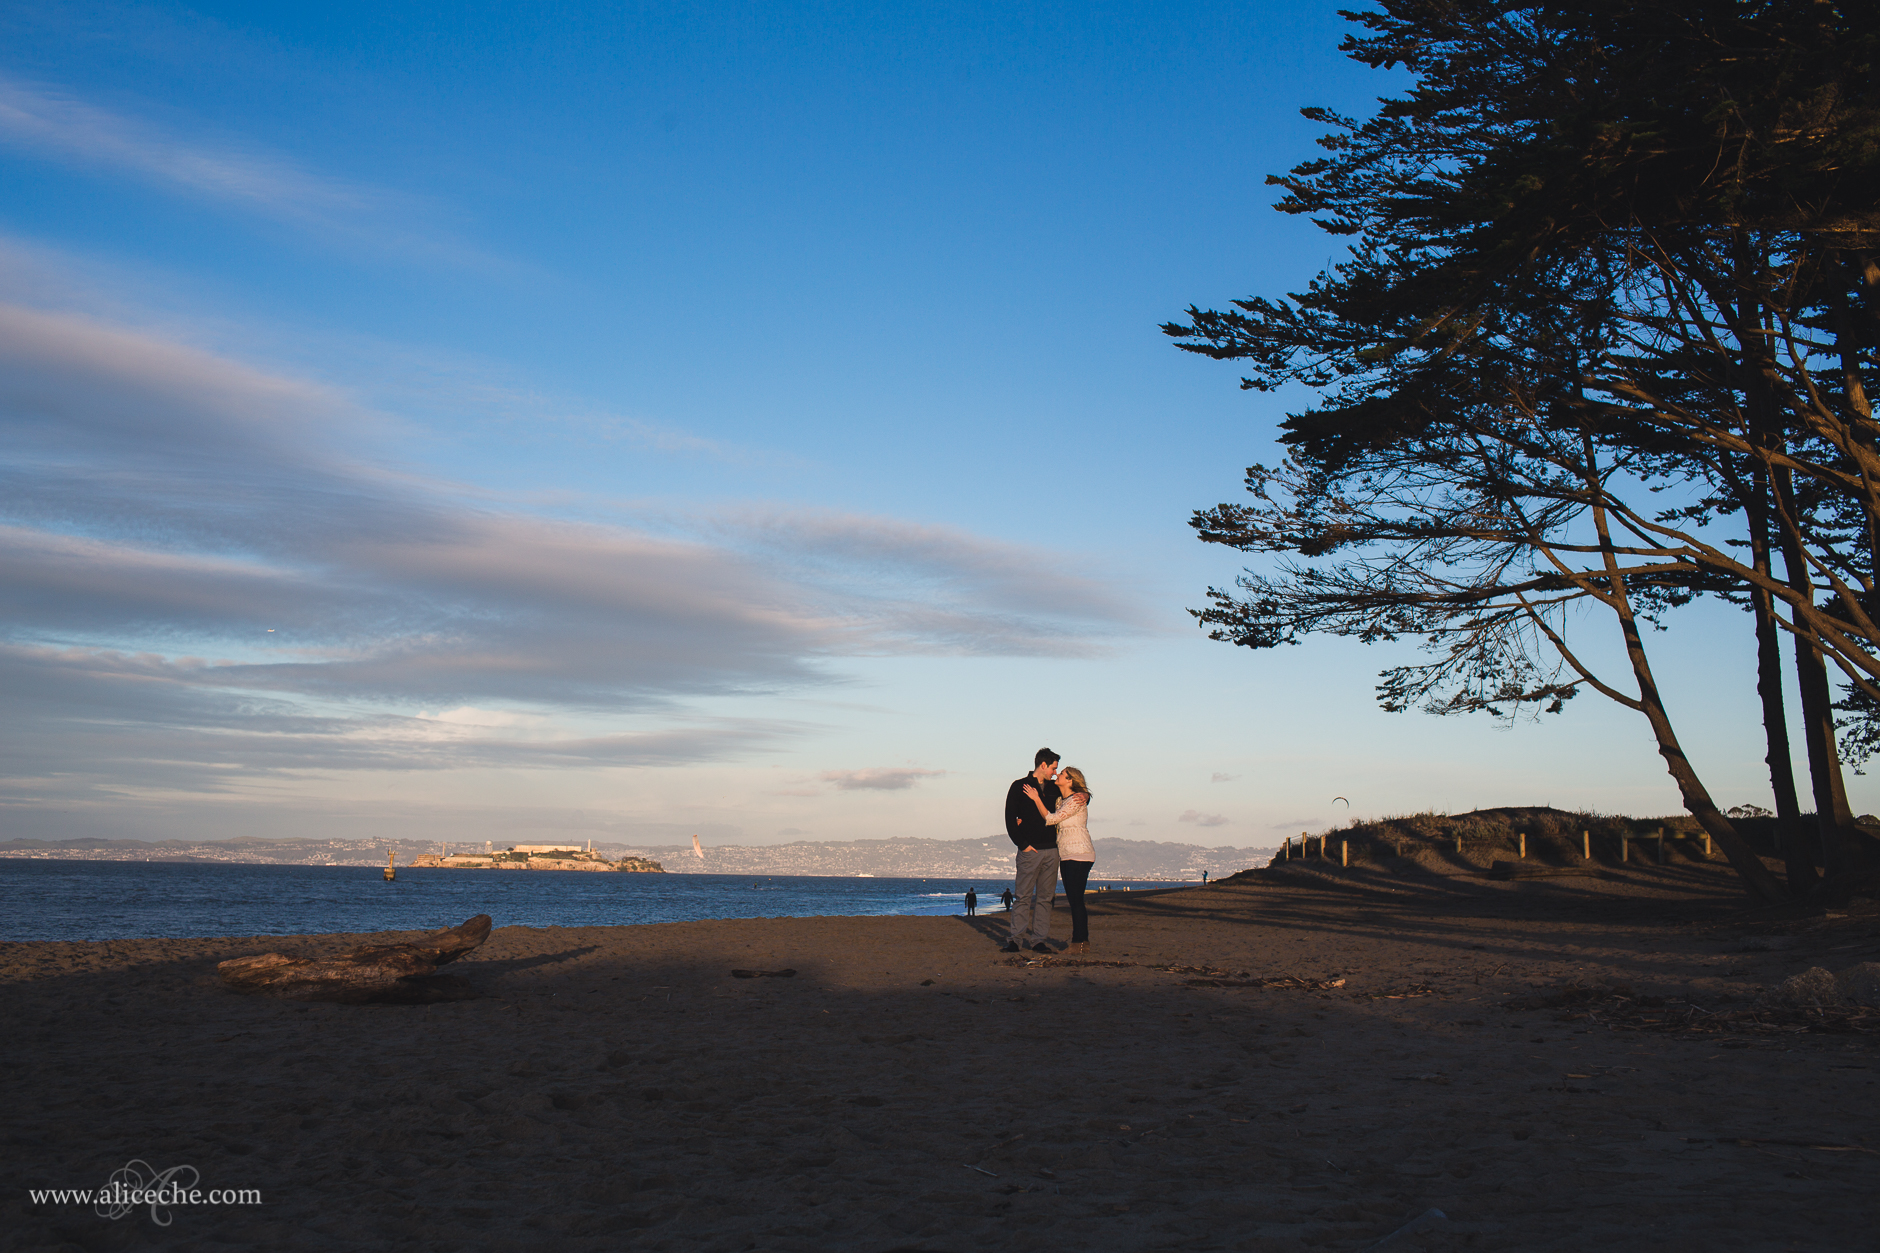 alice-che-photography-san-francisco-engagement-shoot-crissy-field-hugging-couple